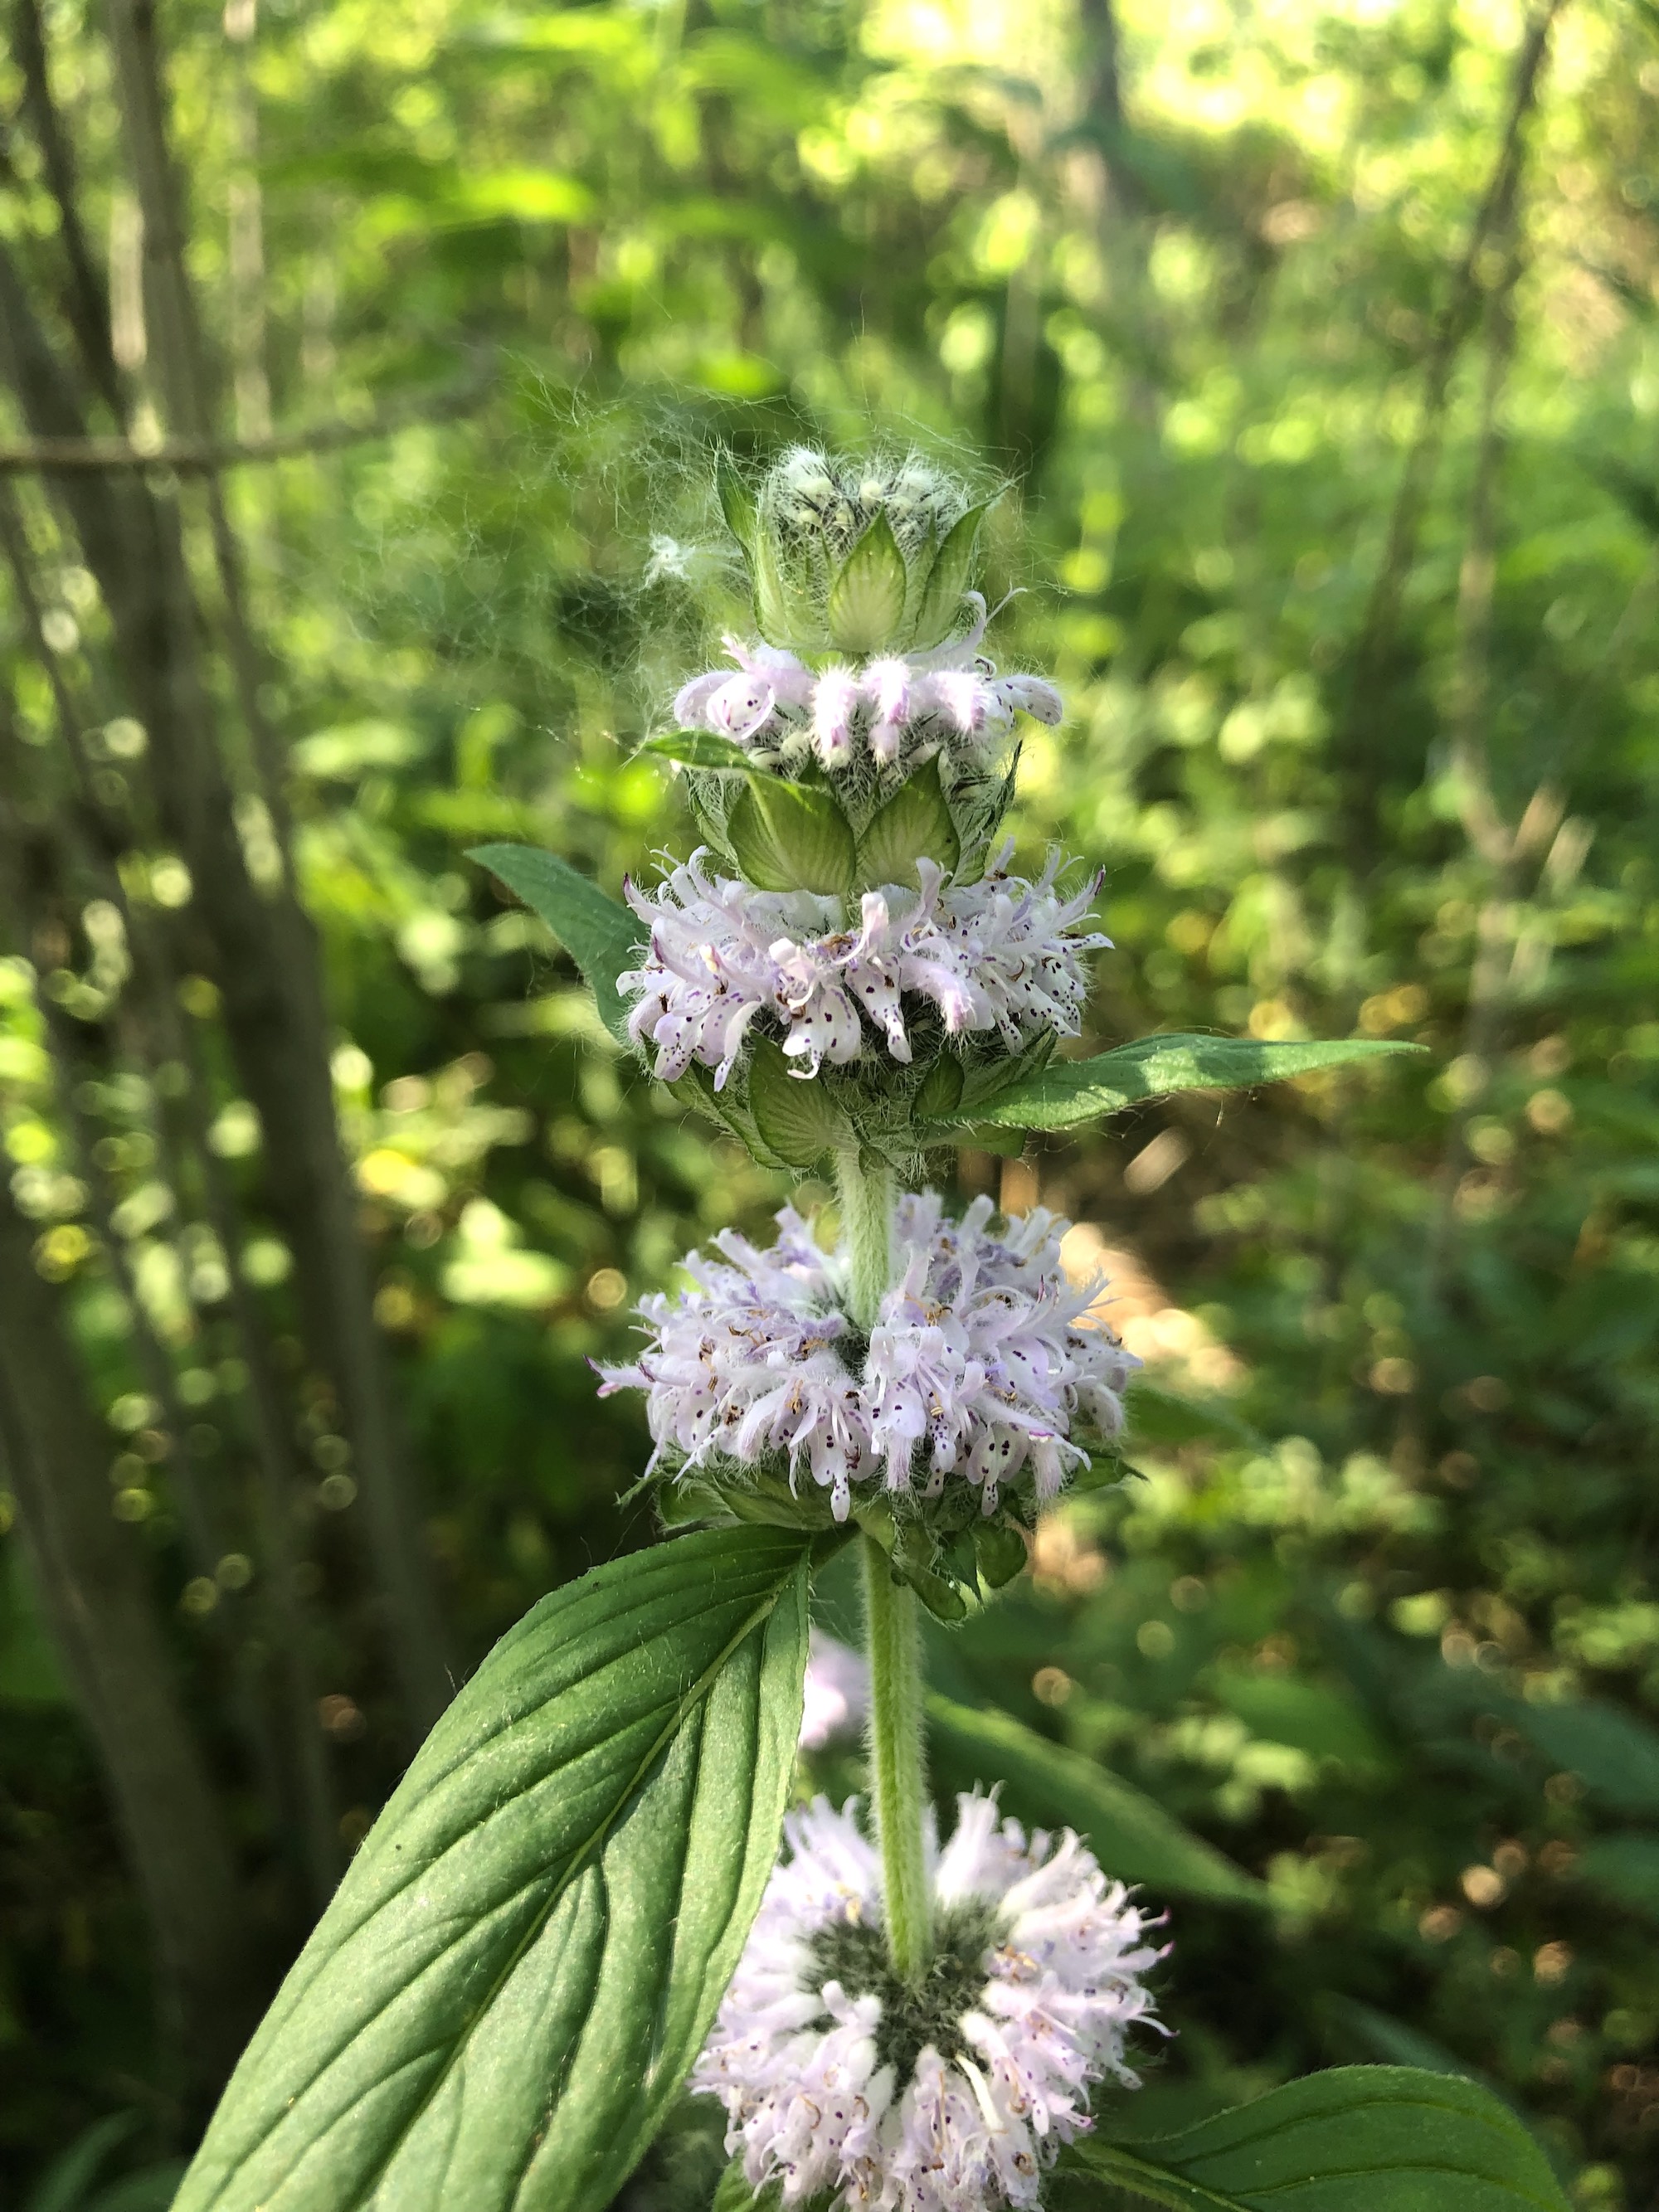 Downy Pagoda-plant in woods just behind Council Ring in the UW-Arboretum Oak Savanna in Madison, Wisconsin on June 10, 2021.